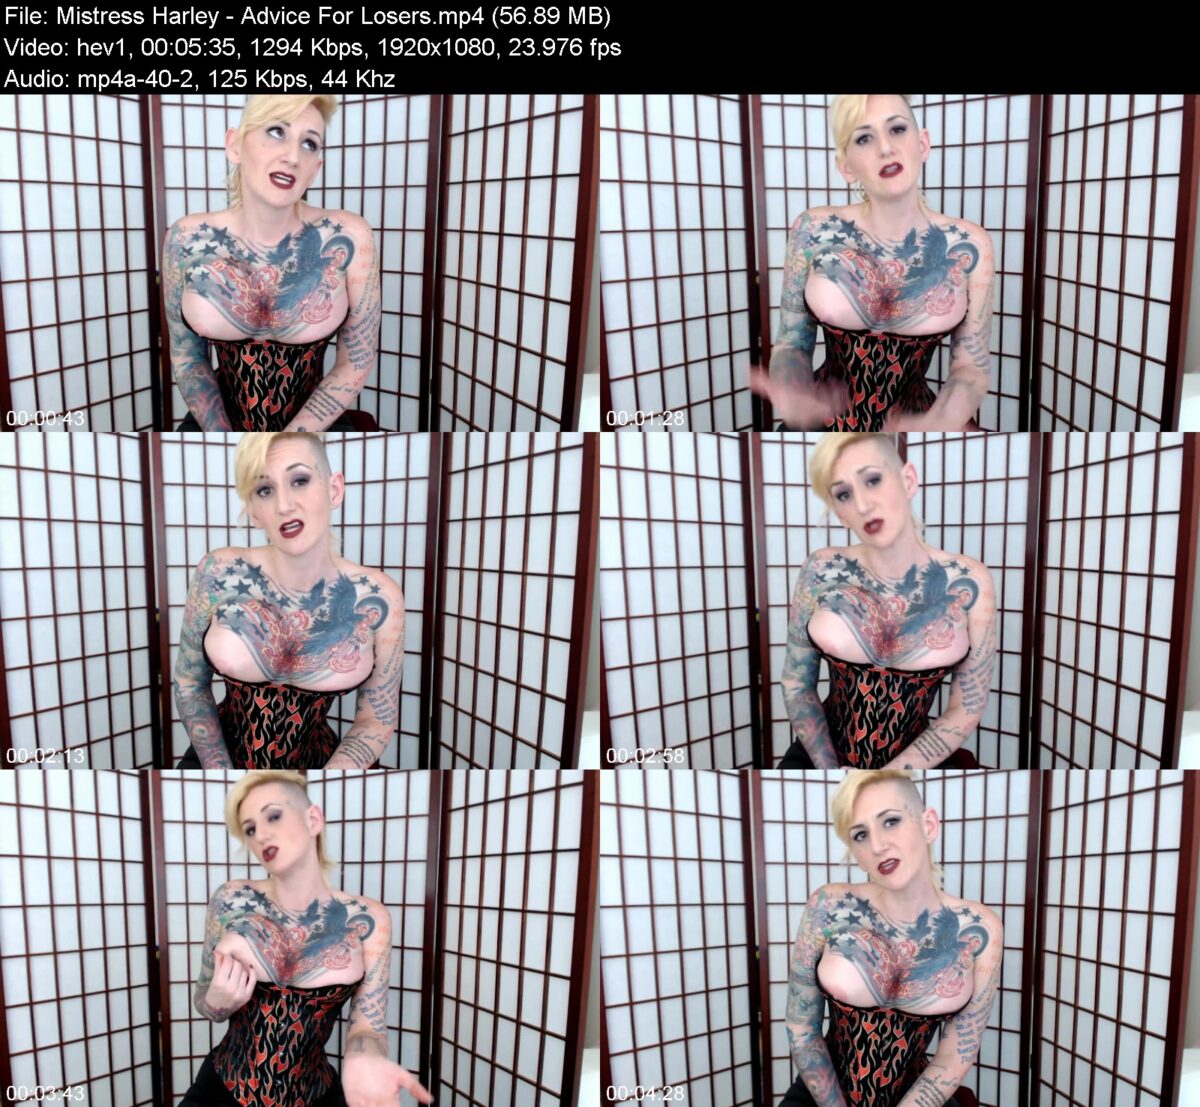 Actress: Mistress Harley. Title and Studio: Advice For Losers